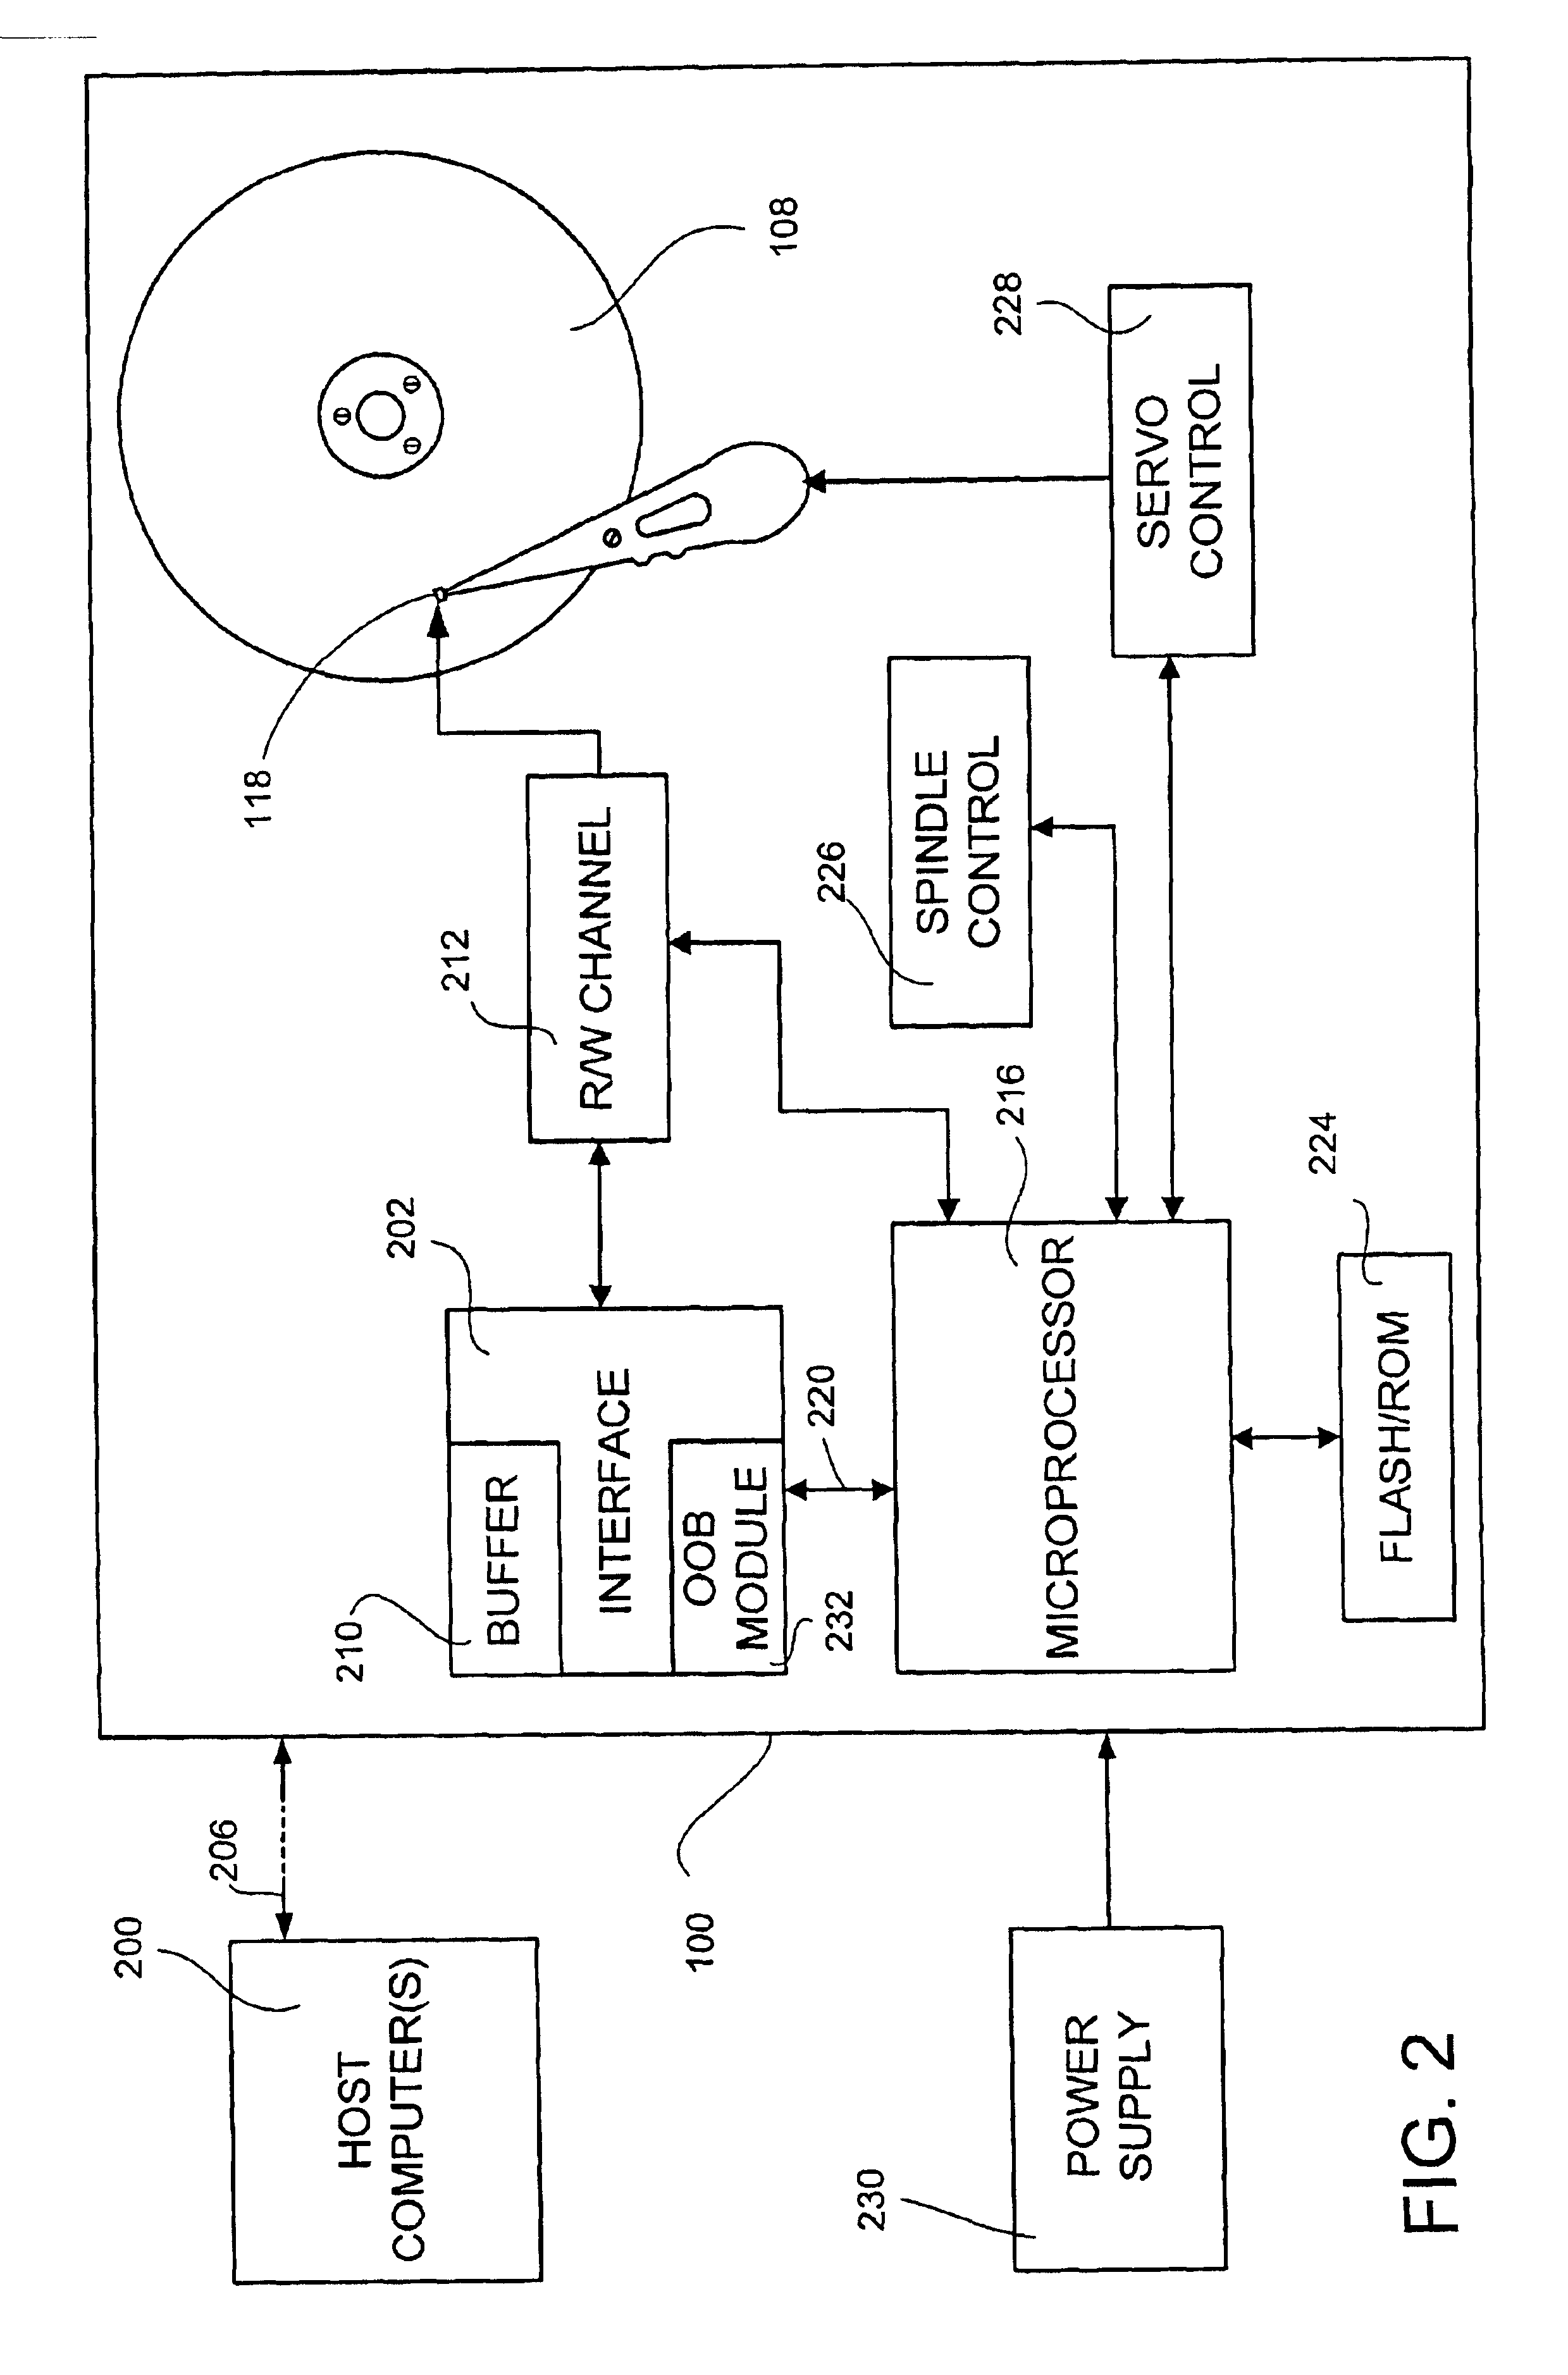 System for selectively controlling spin-up control for data storage devices in an array using predetermined out of band (OOB) signals